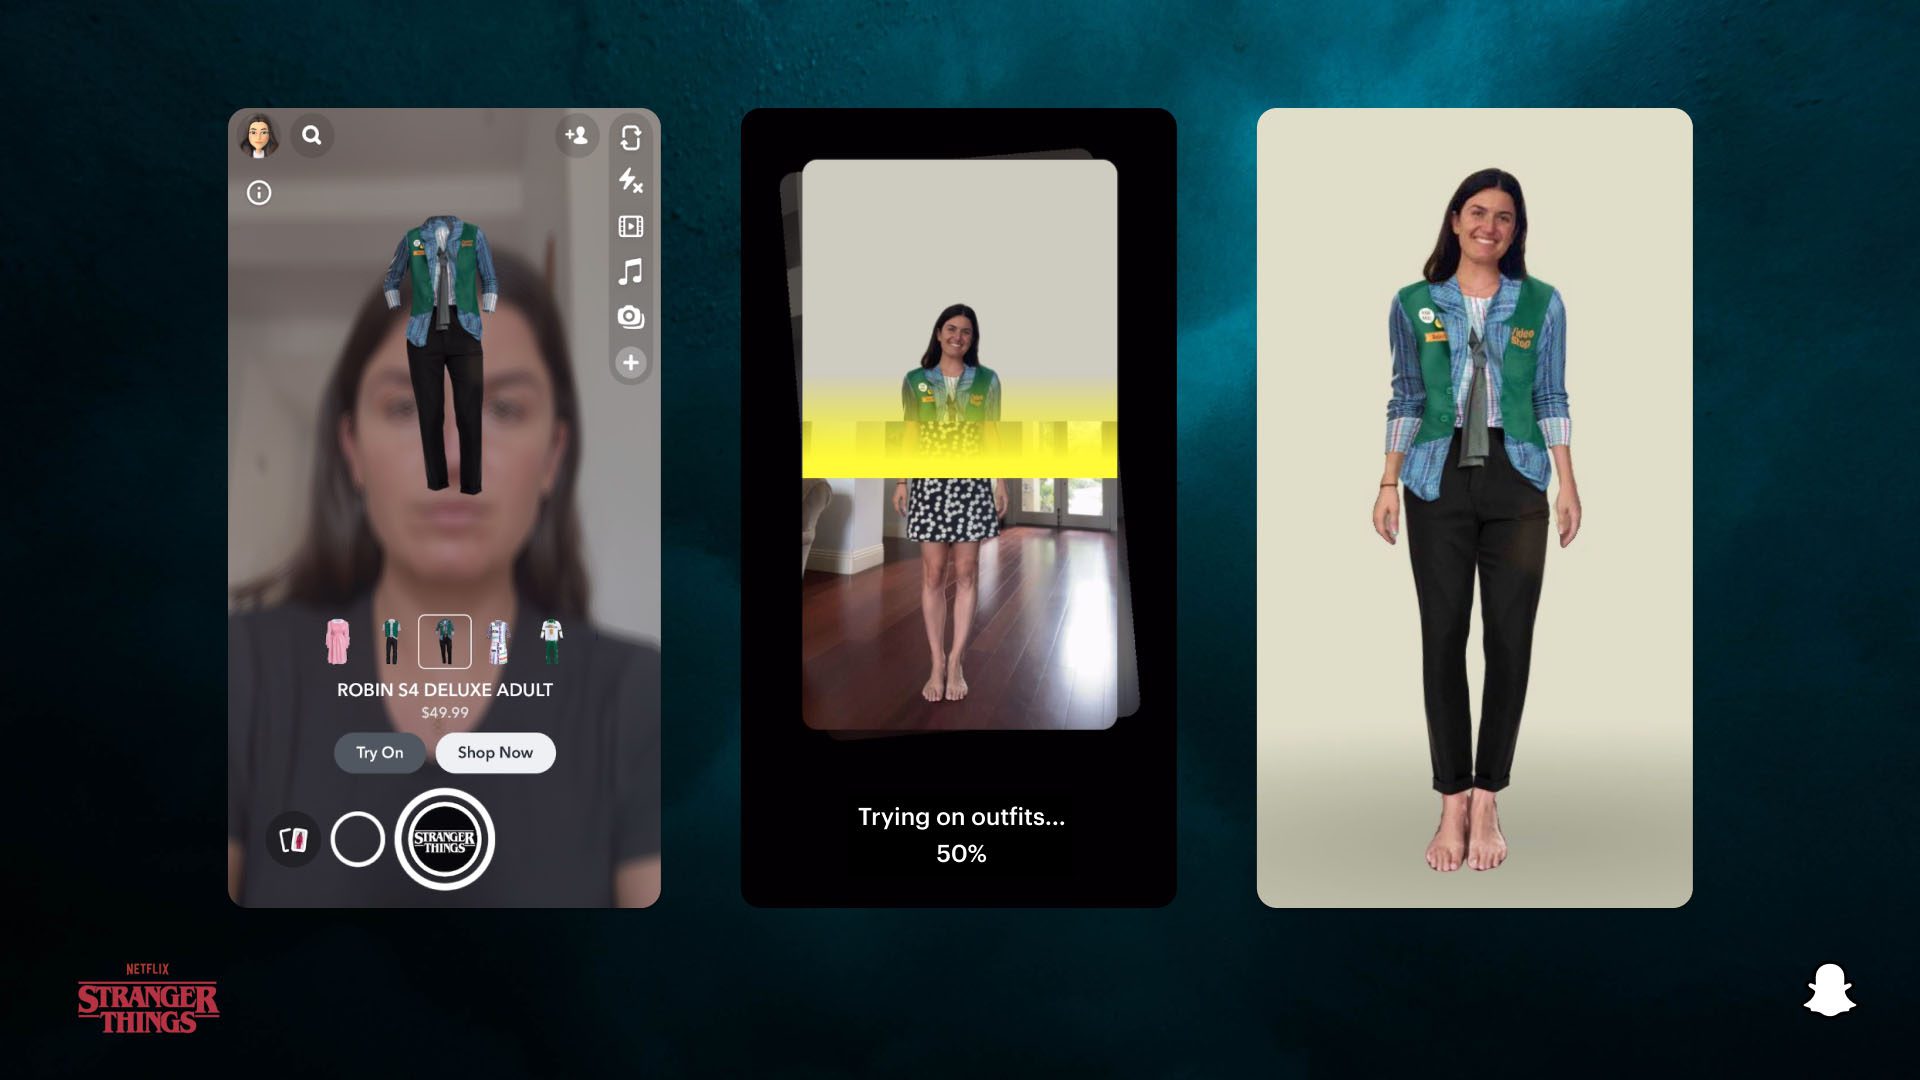 Snapchat Halloween Costume Virtual AR Try-On Experience